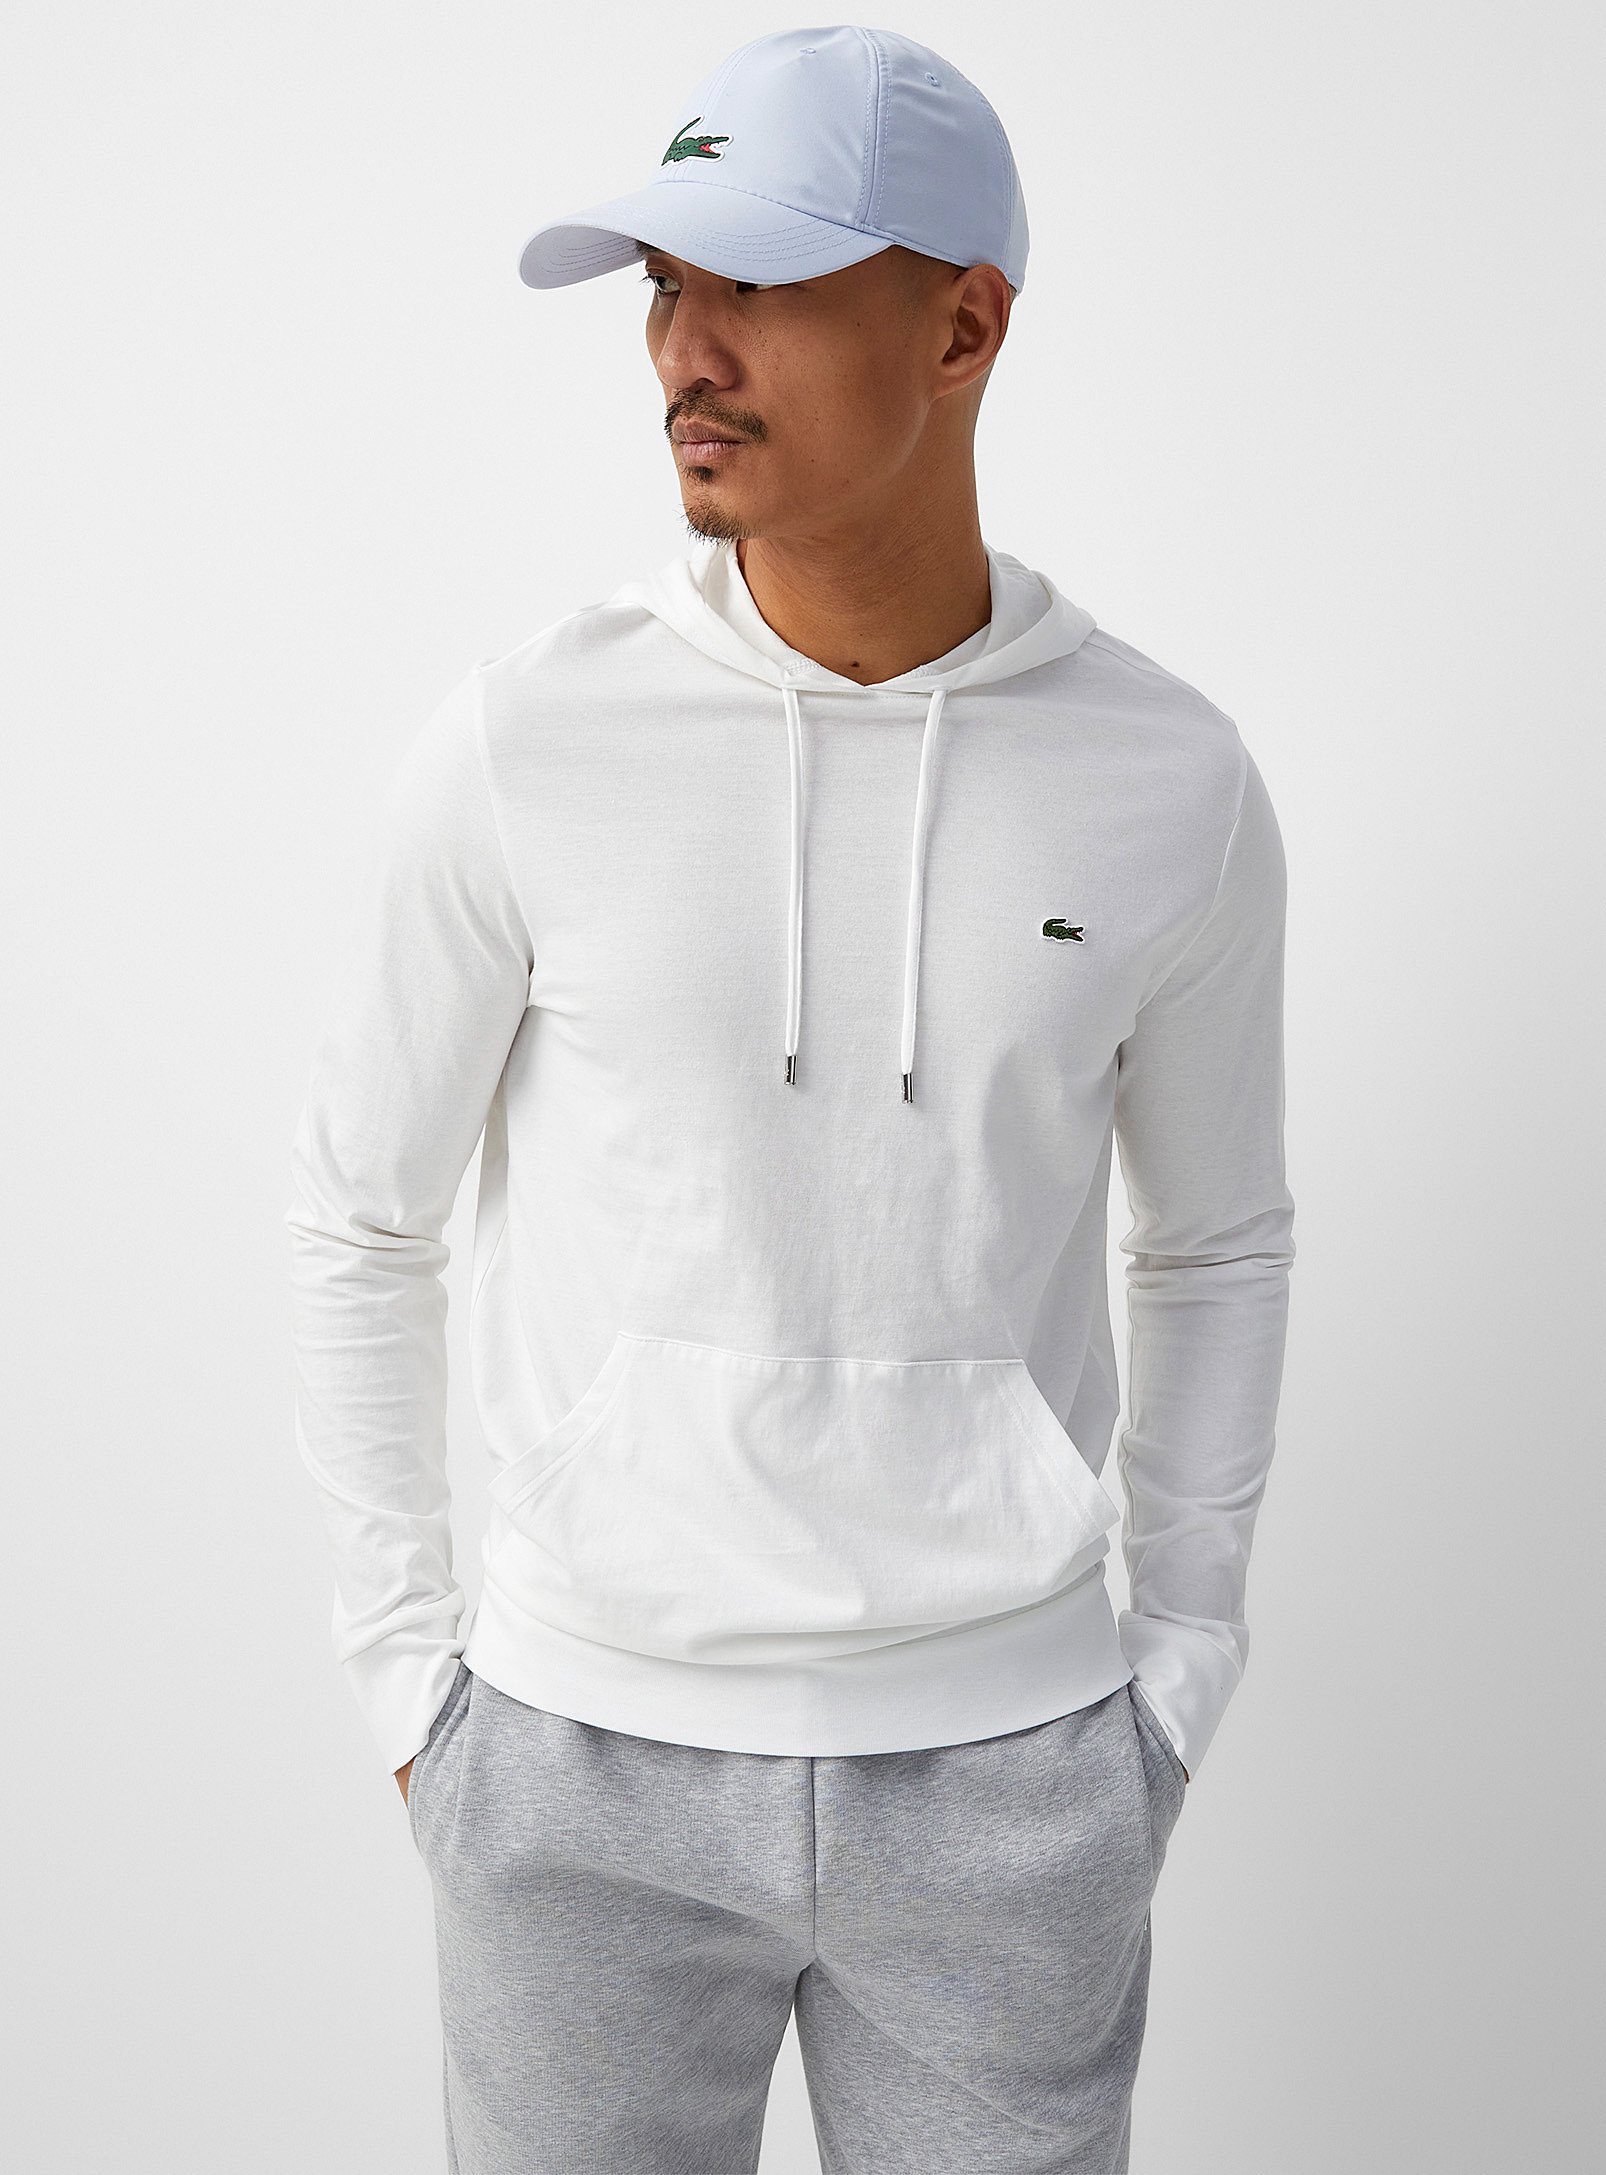 Lacoste Crocodile Emblem Jersey Hoodie In Ivory White